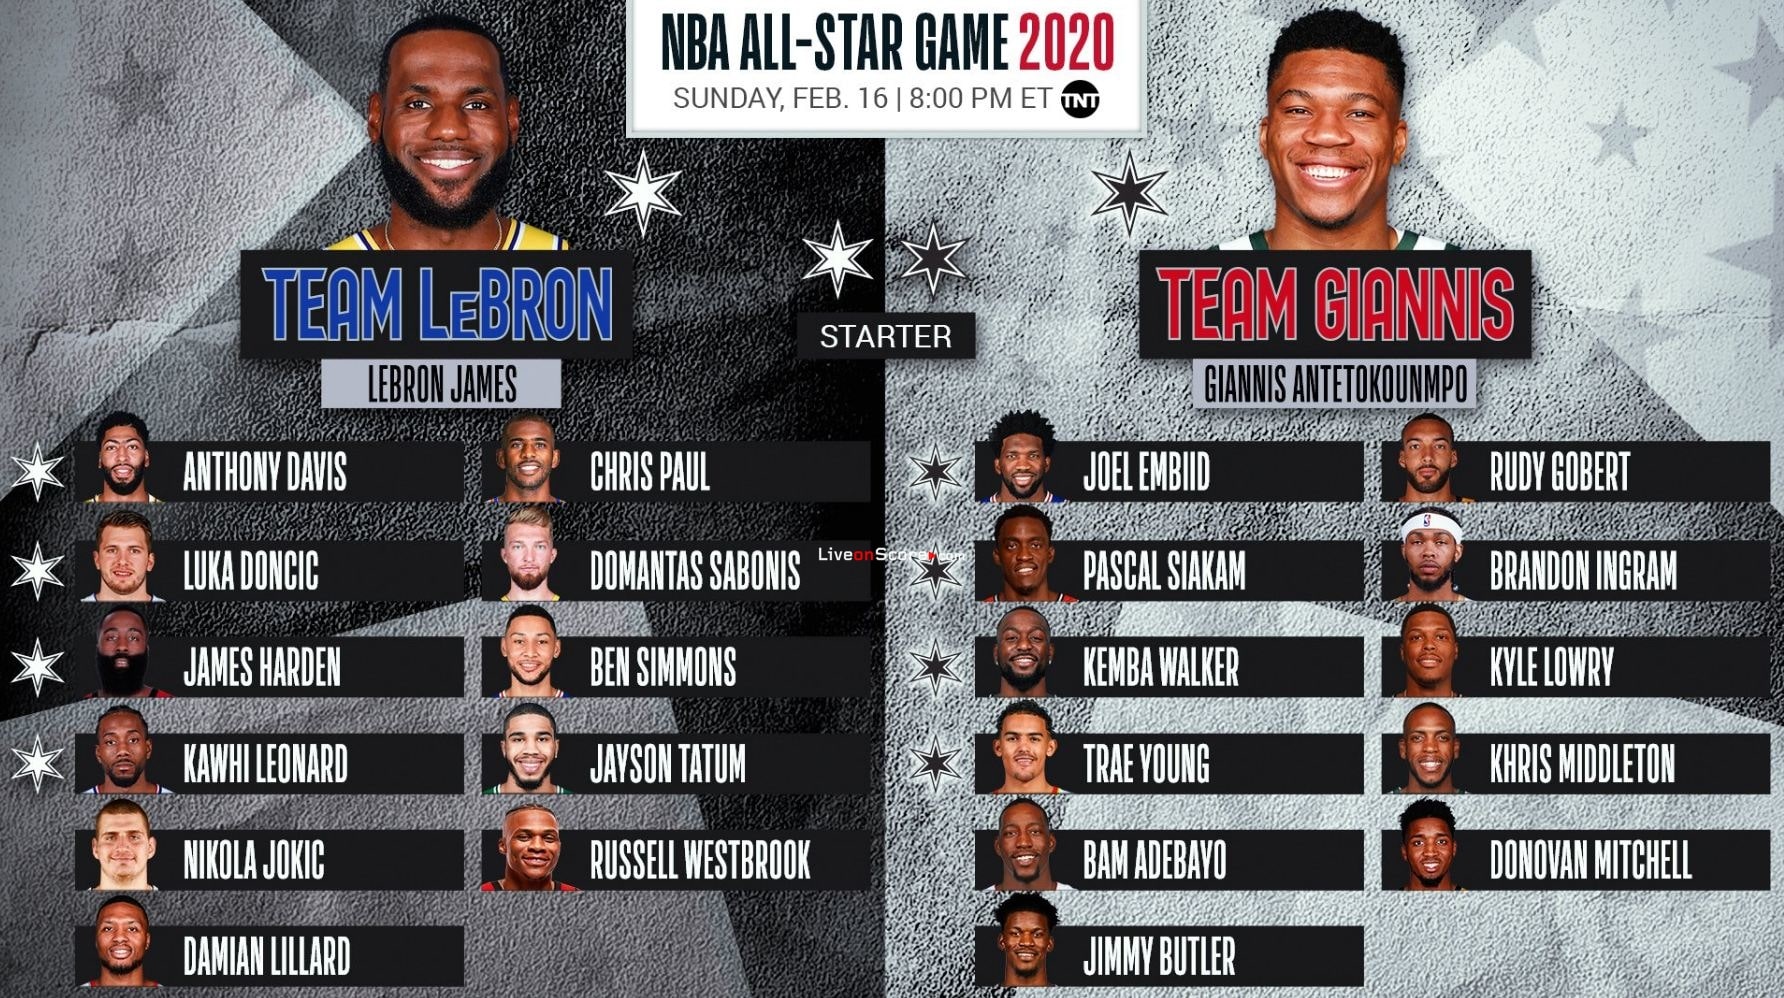 Team Giannis vs Team LeBron Preview and Prediction Live stream NBA All Star 2020